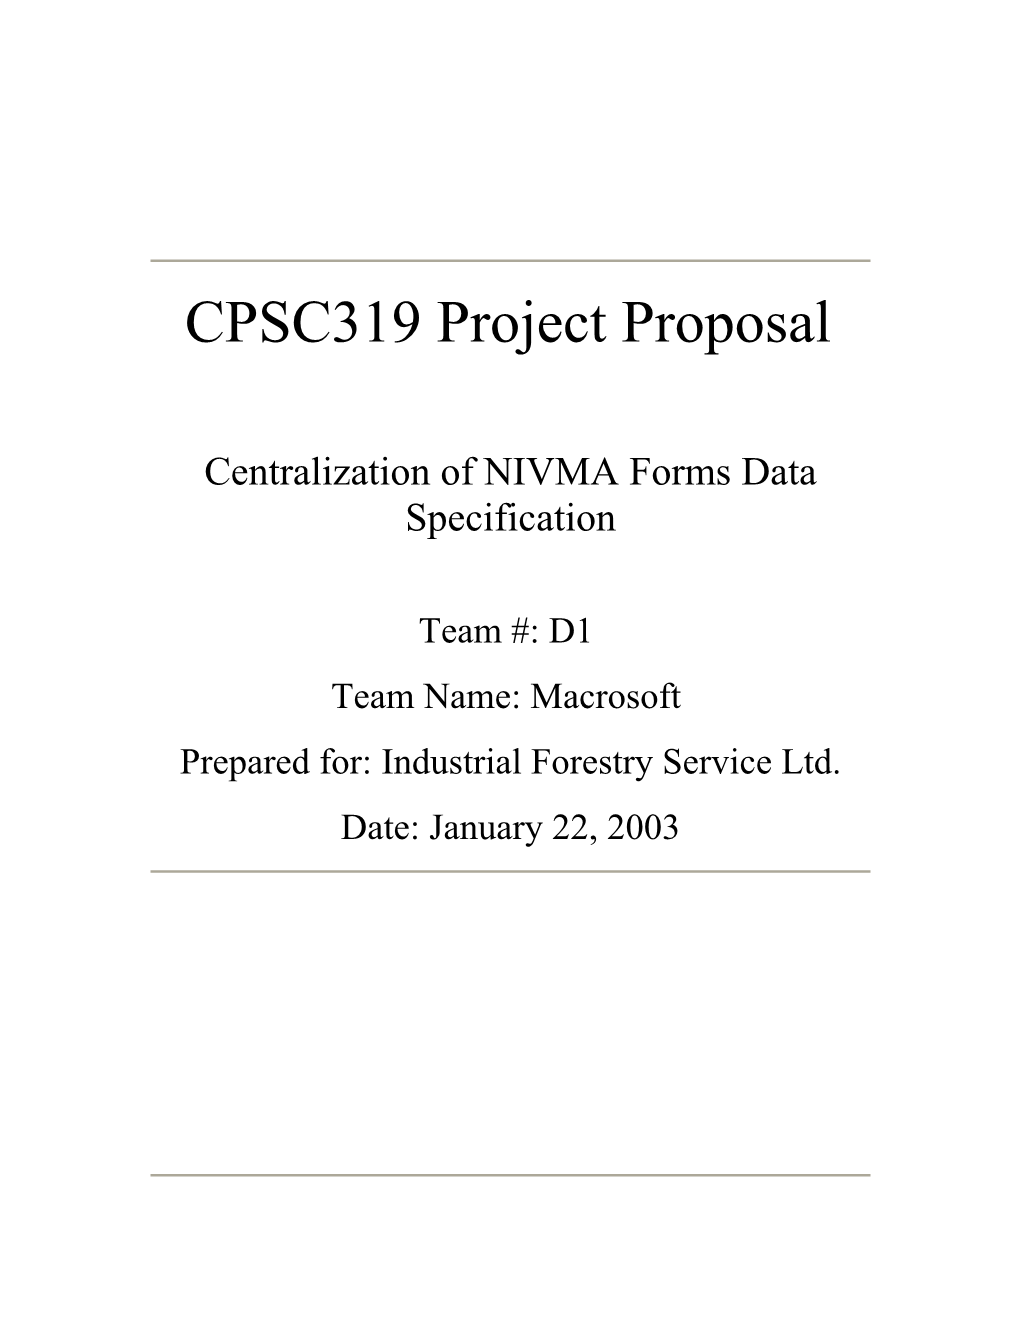 CPSC319 Project Proposal